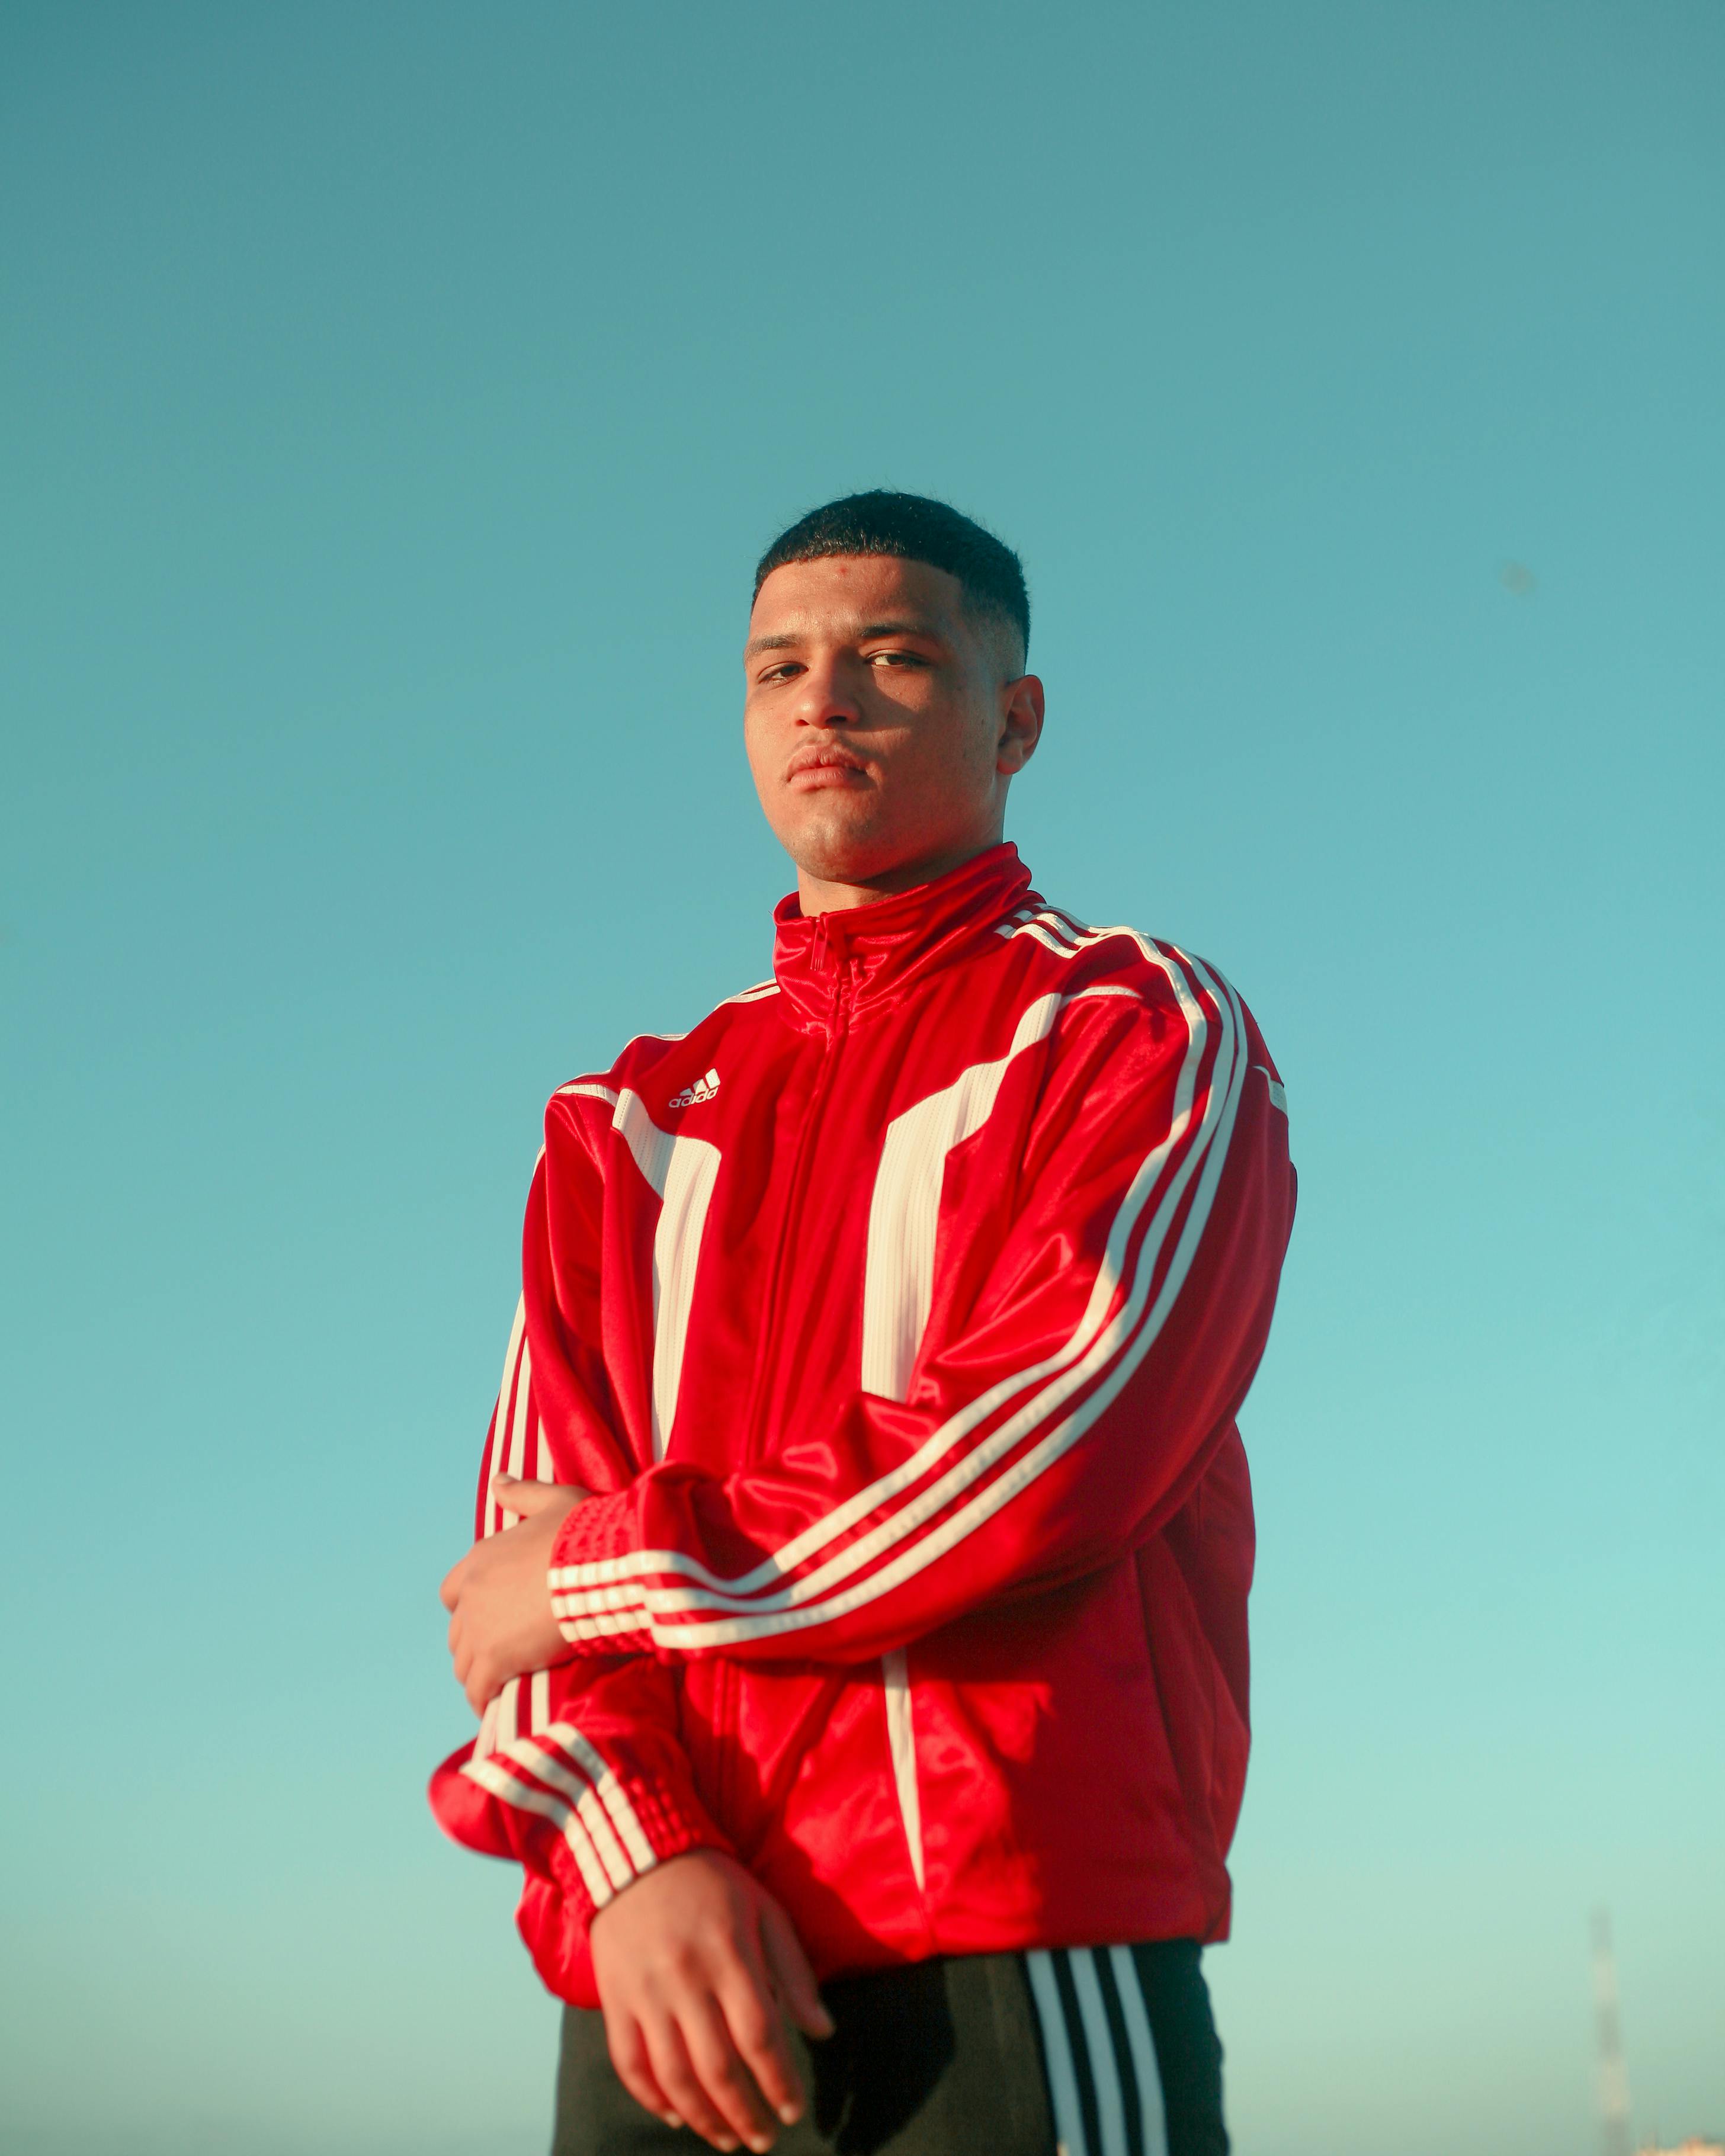 man in red and white adidas red jacket